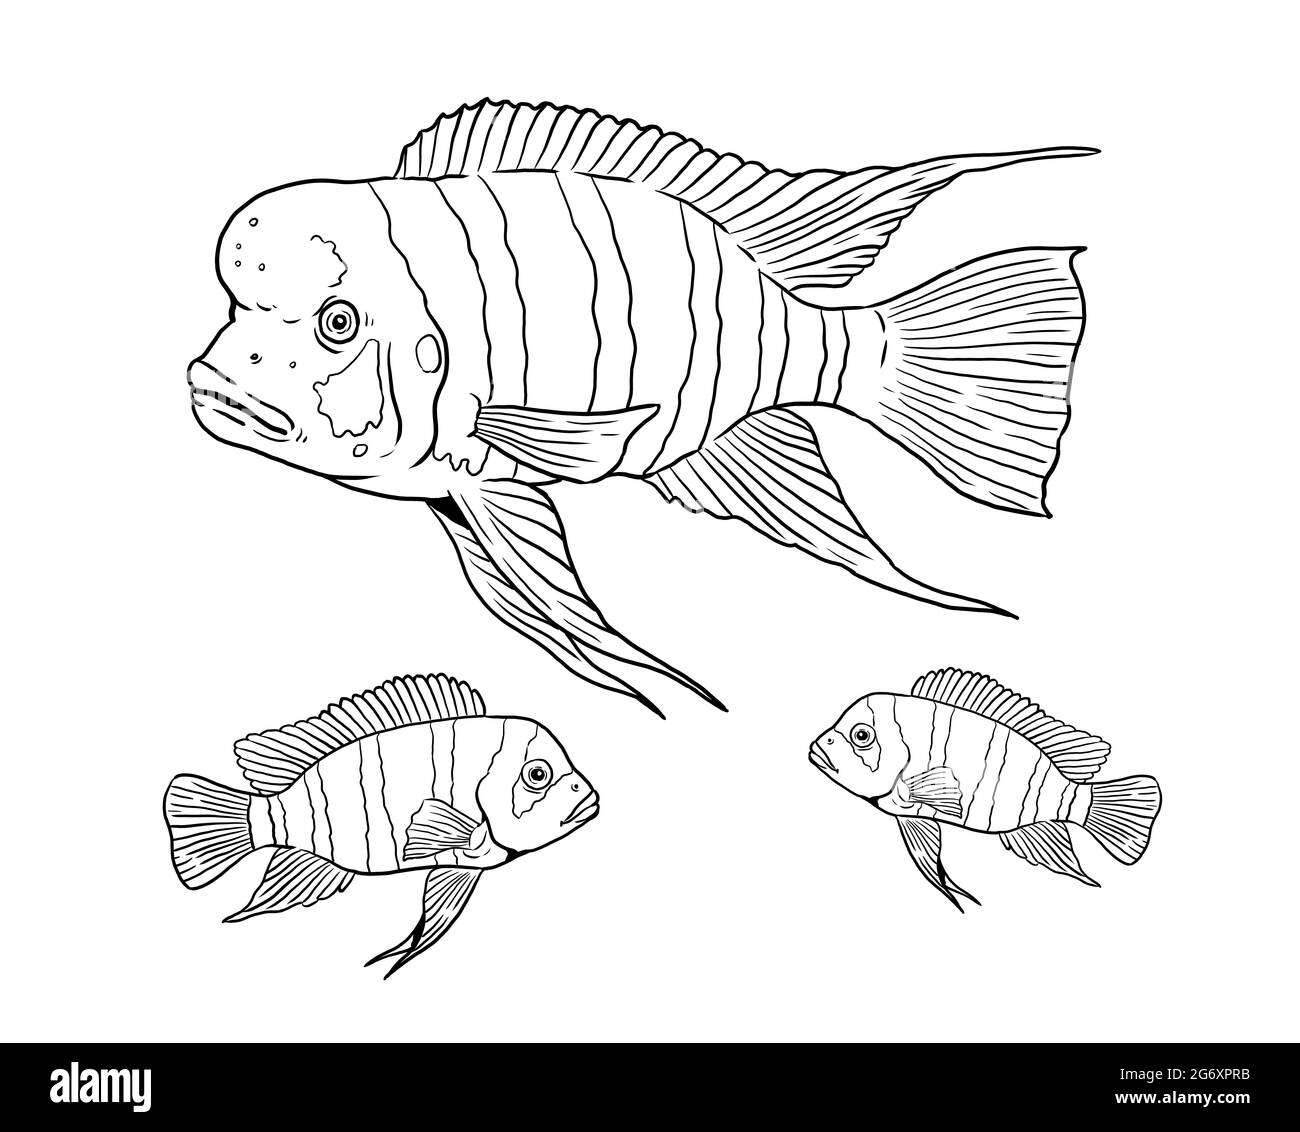 Aquarium with Cyphotilapia frontosa for coloring. Colorful african fish templates. Coloring book for children and adults. Stock Photo